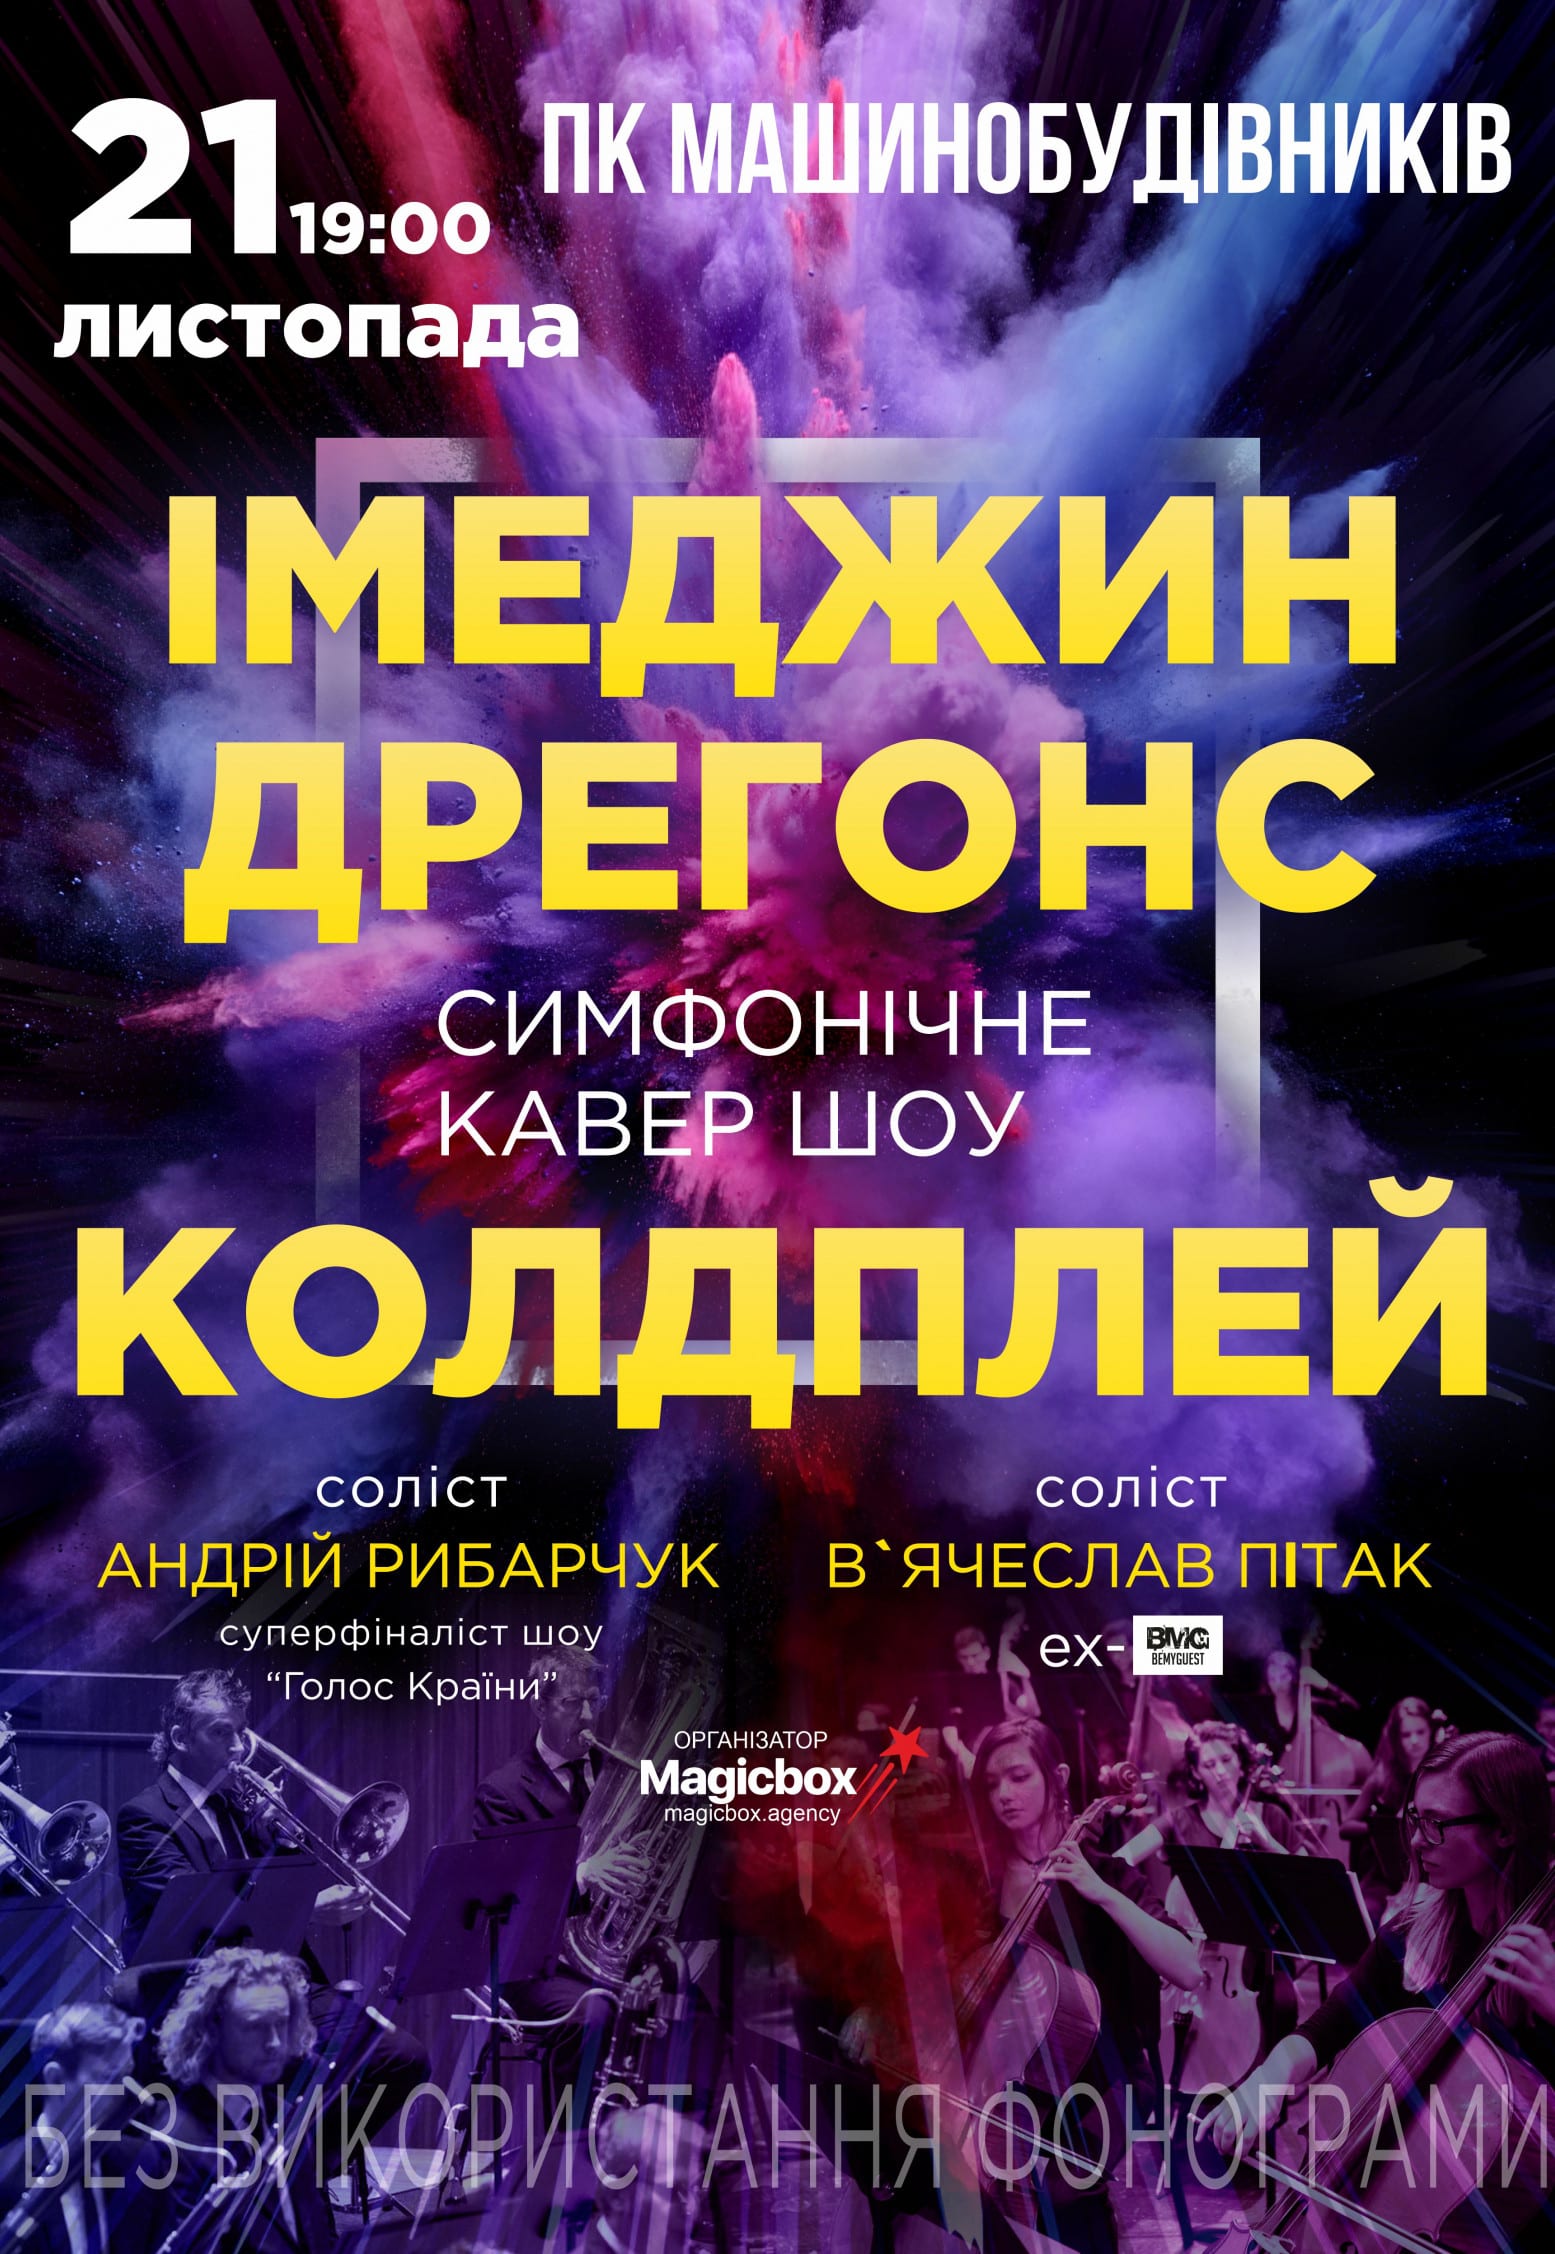 Imagine Dragons & Coldplay Symphonic Cover Show Днепр, 21.11.2020. Афиша Днепра